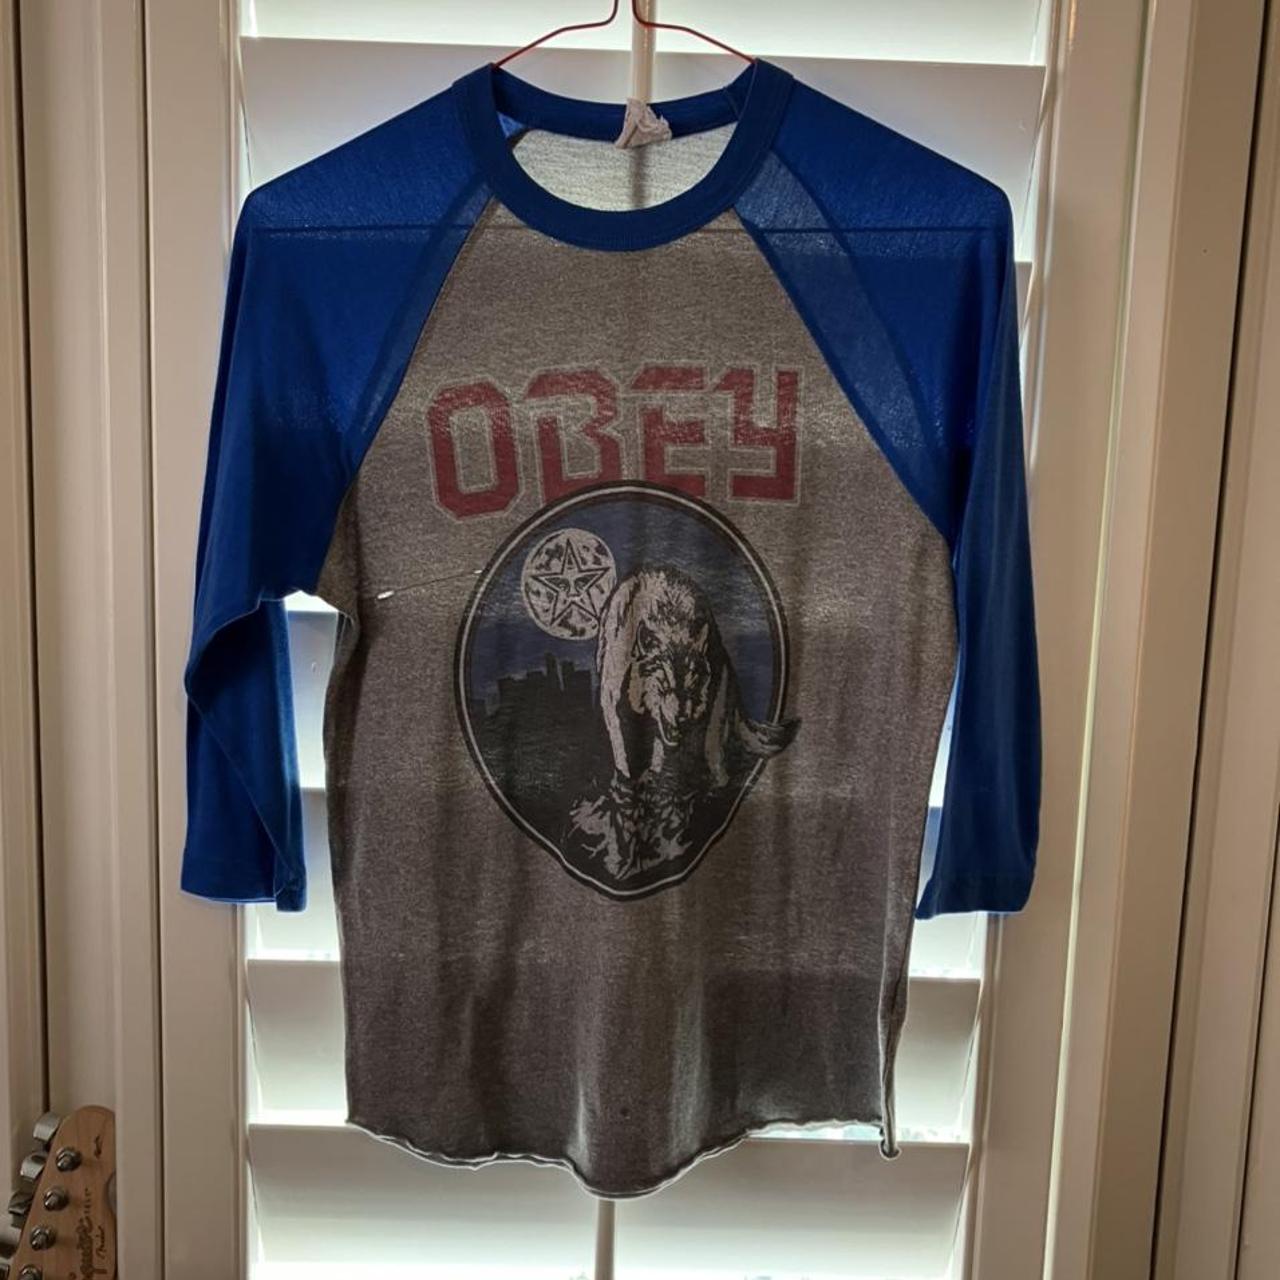 Obey Women's Blue and Grey Shirt